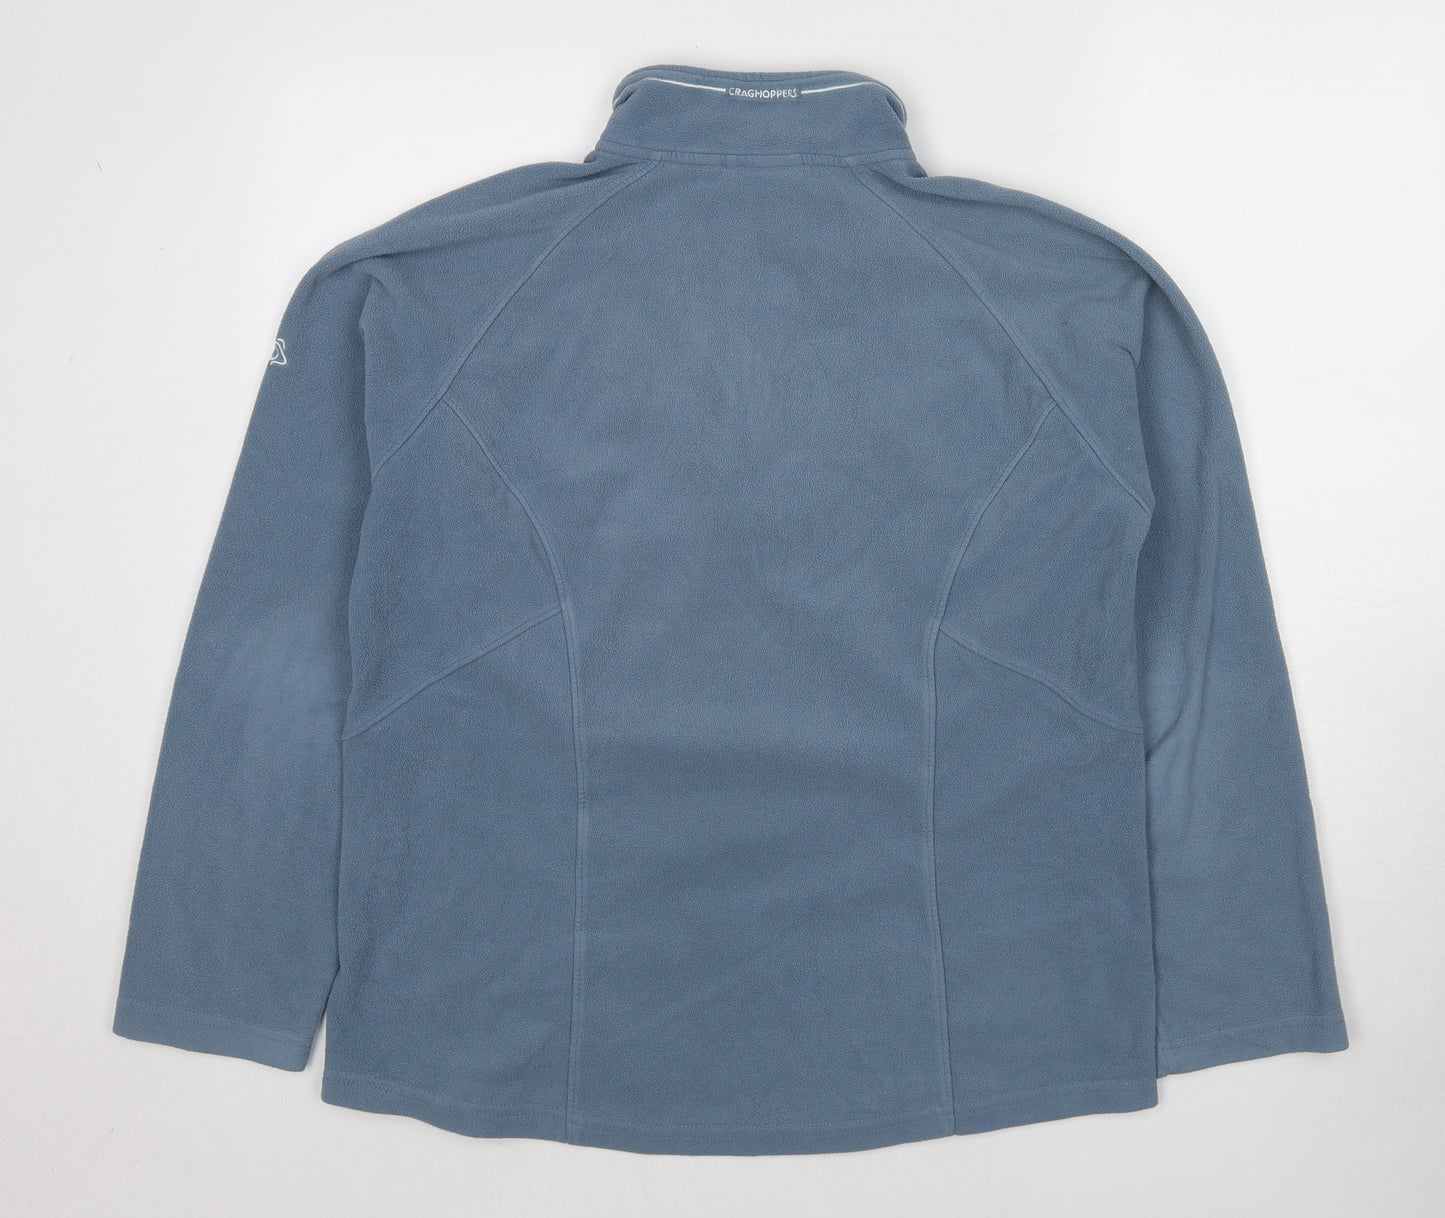 Craghoppers Womens Blue Polyester Pullover Sweatshirt Size 16 Zip